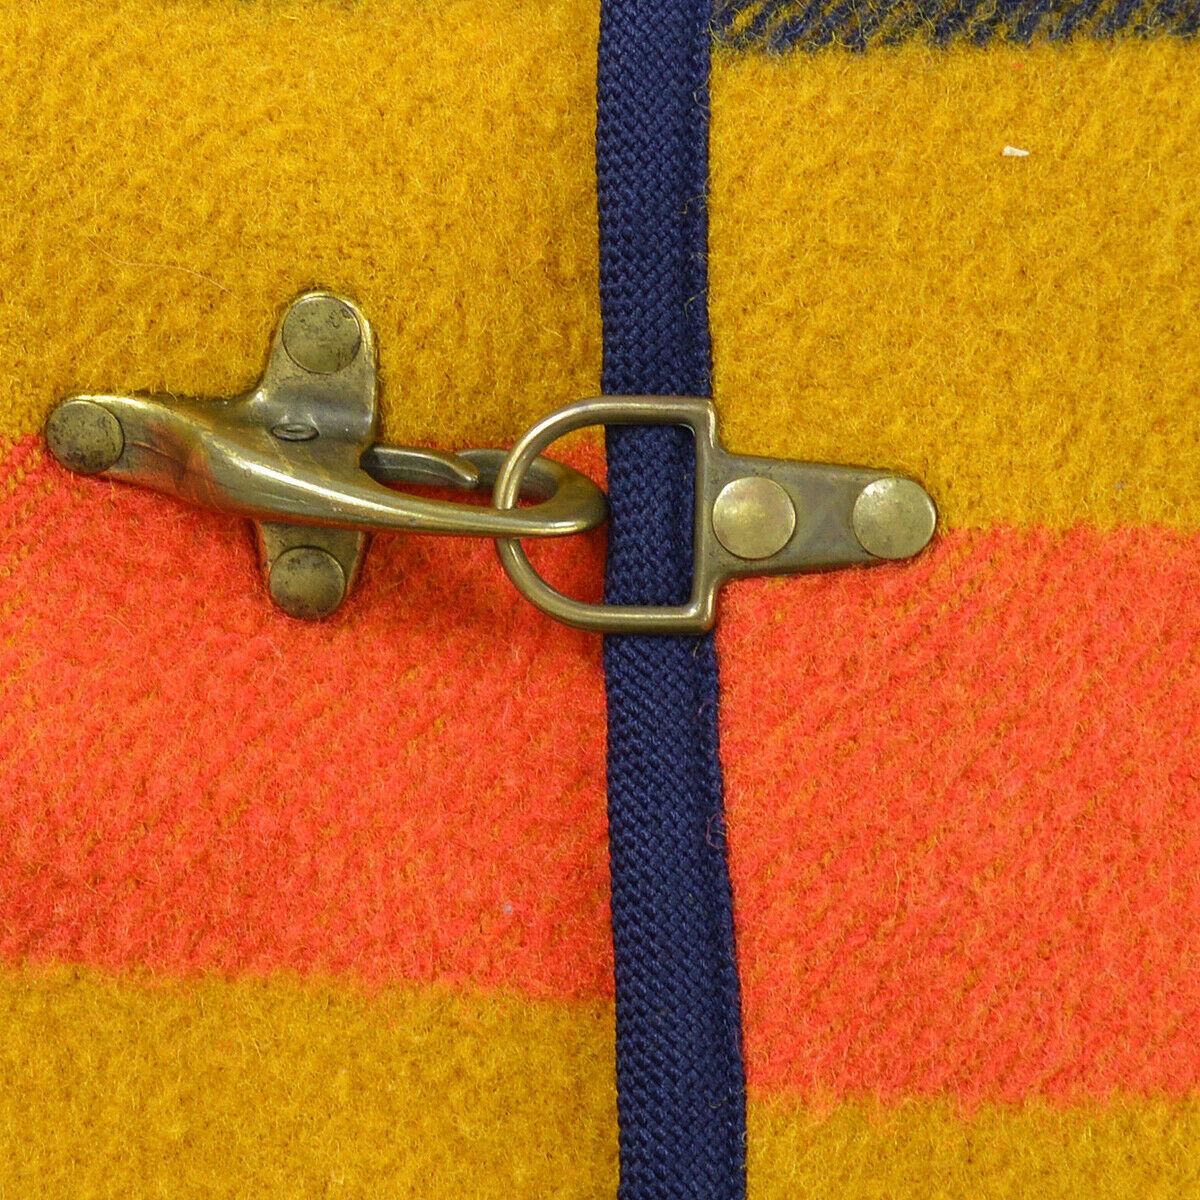 Hermes Wool Yellow Red Blue Orange Rocabar Men's Women's Stripe Oversize Trench Style Jacket Coat

Size listed #52
Wool
Antique gold tone hardware
Toggle closure 
Made in France
Shoulder width 22.5 